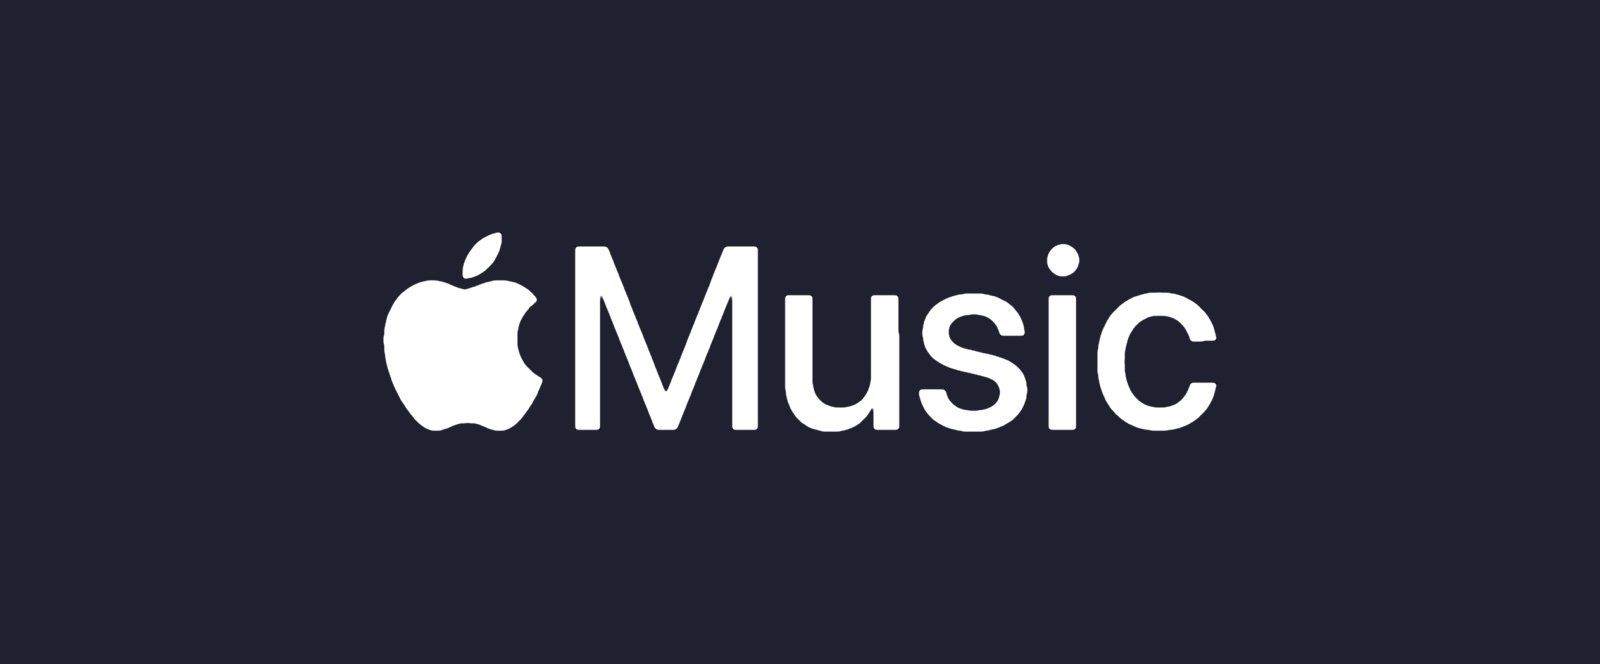 Apple Music Review: It's Great But Is It As Good As Spotify?